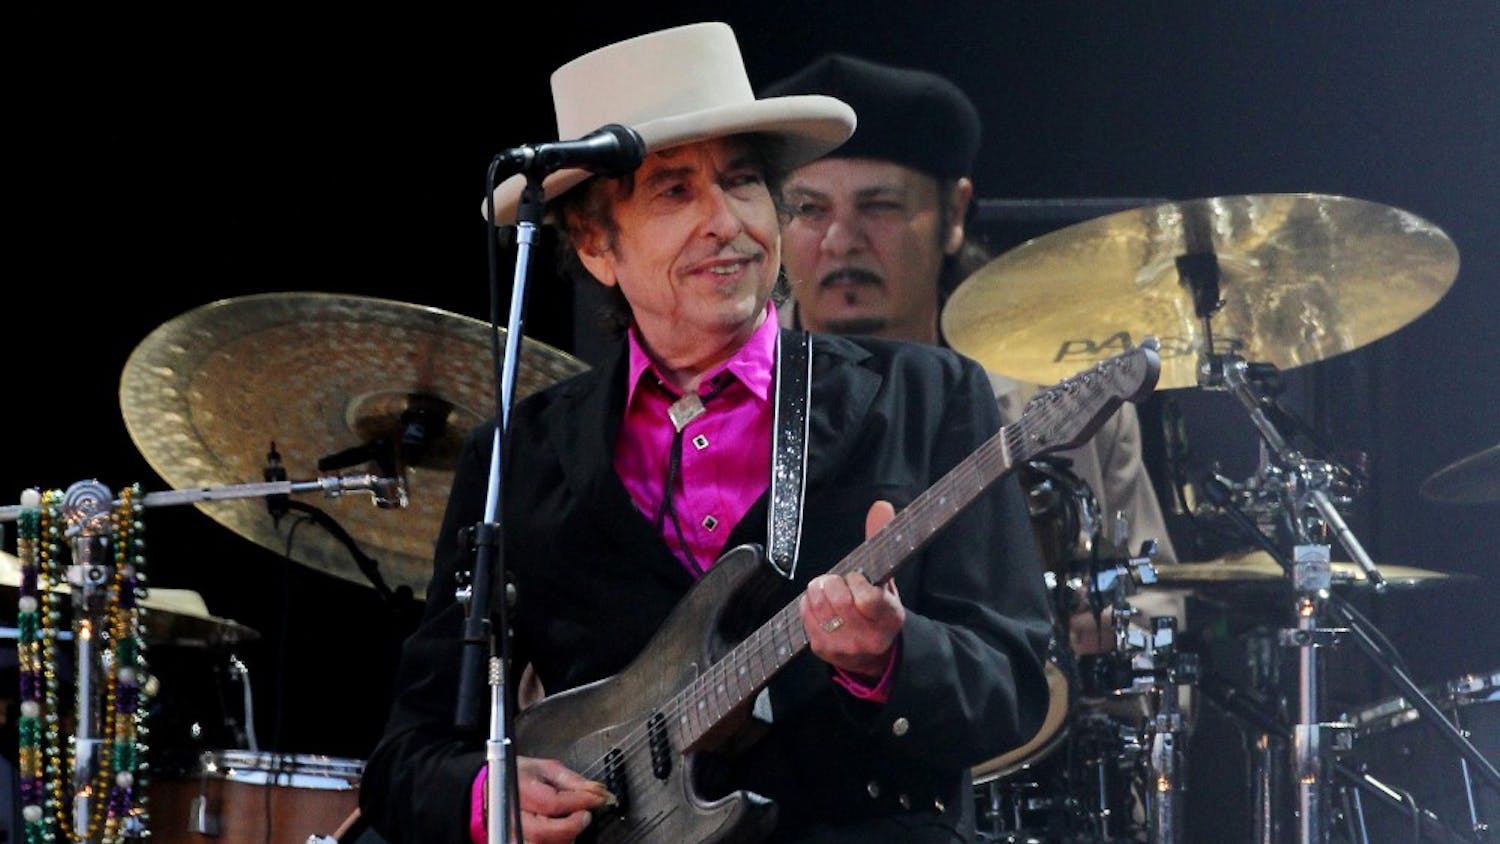 File photo dated 3/7/2010 of American singer Bob Dylan, who has been hailed as "a great poet in the English-speaking tradition" following his surprise win of the Nobel Prize in Literature. (Gareth Fuller/PA Wire/Zuma Press/TNS) 